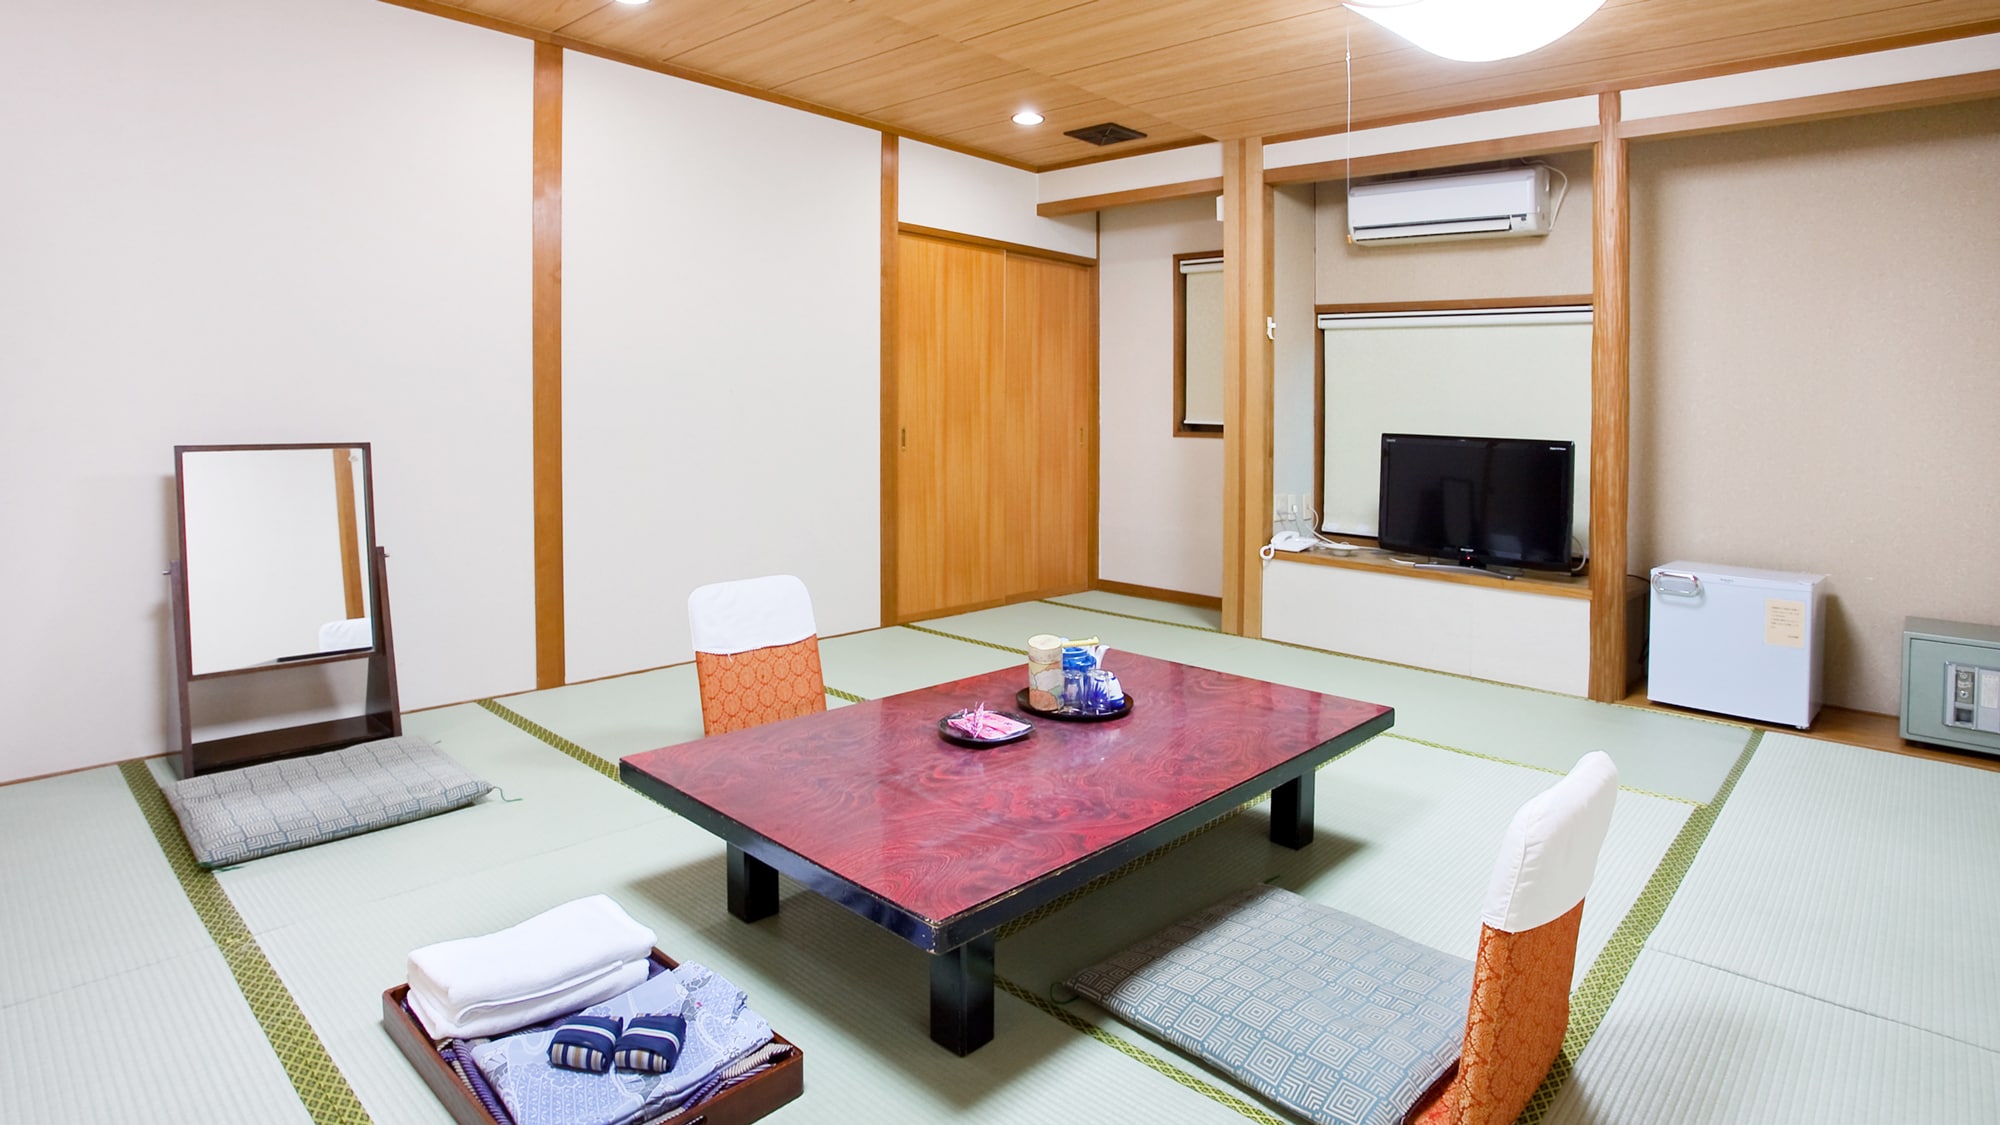 [Main Building 2F] Japanese-style room 10 tatami mats [Non-smoking] Since there is no elevator, there are stairs up to the 2nd floor.